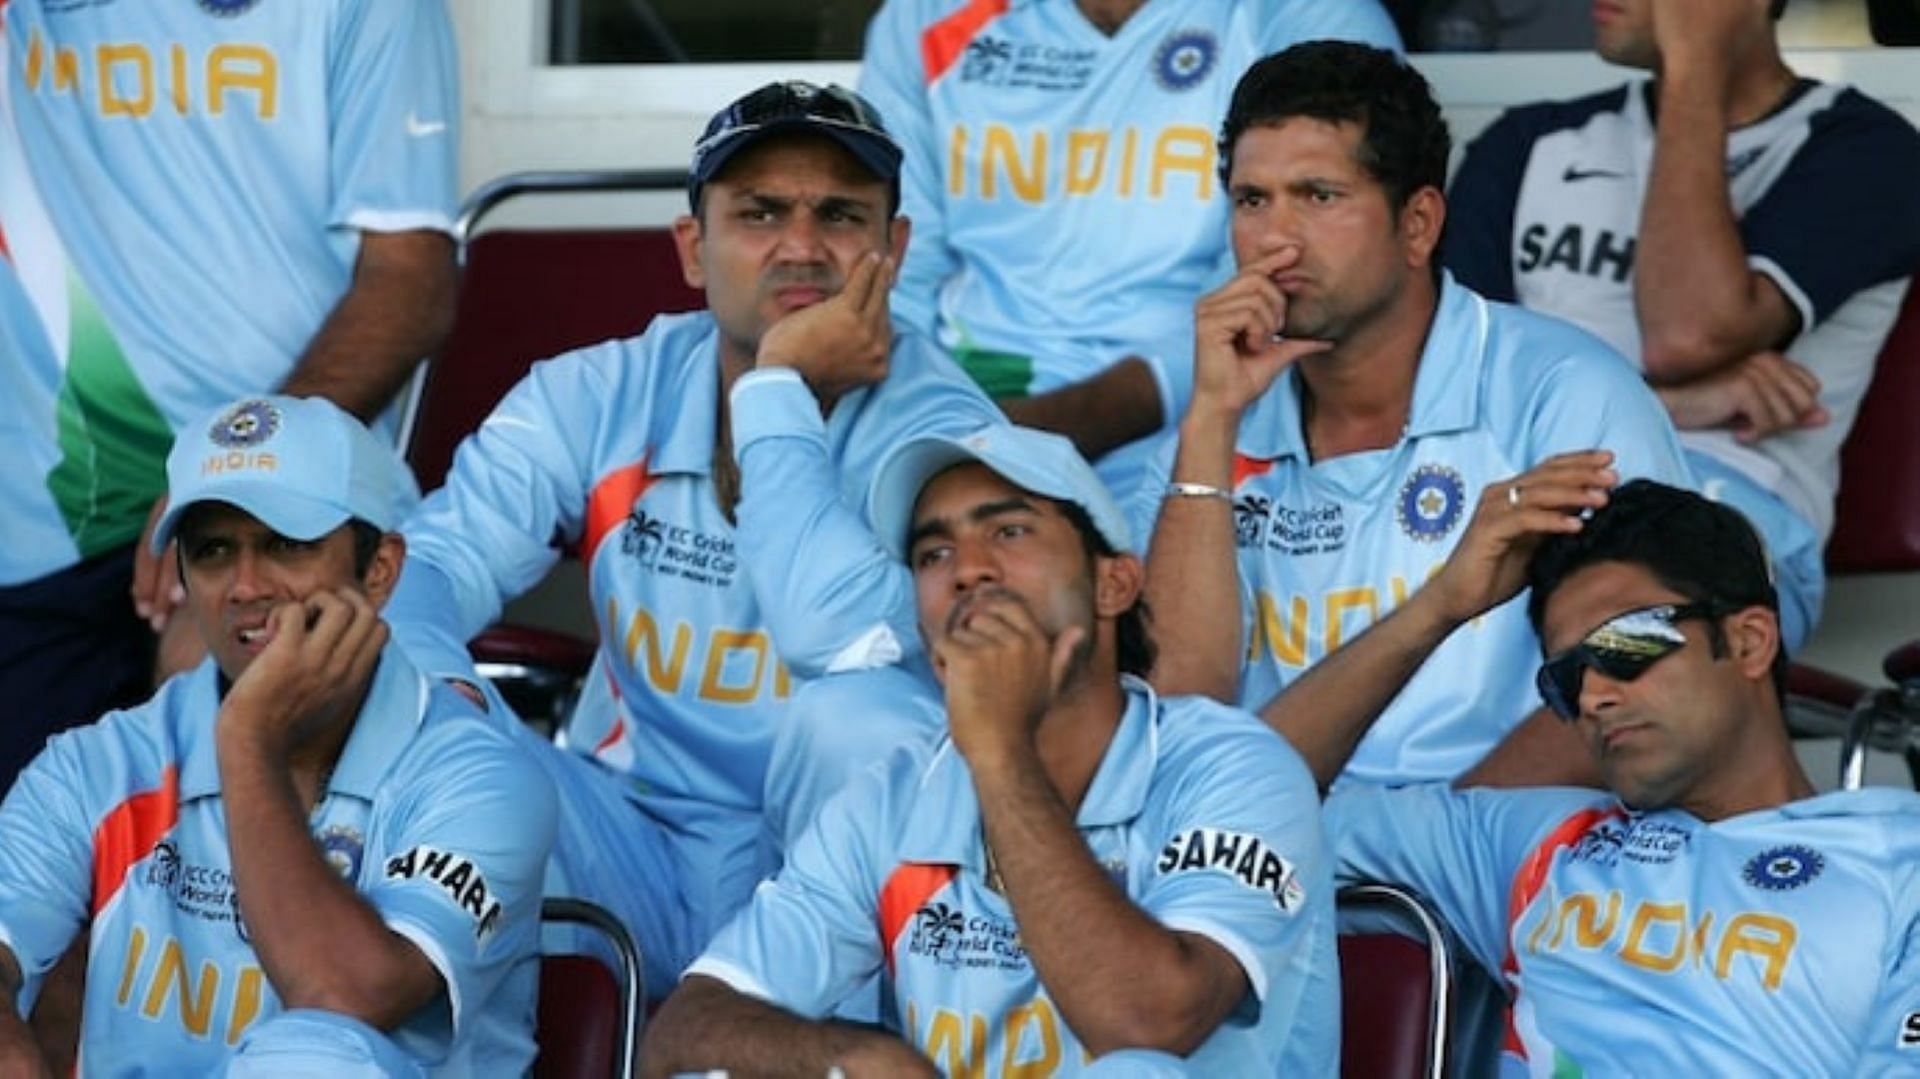 Team India suffered an embarrassing exit from the 2007 World Cup